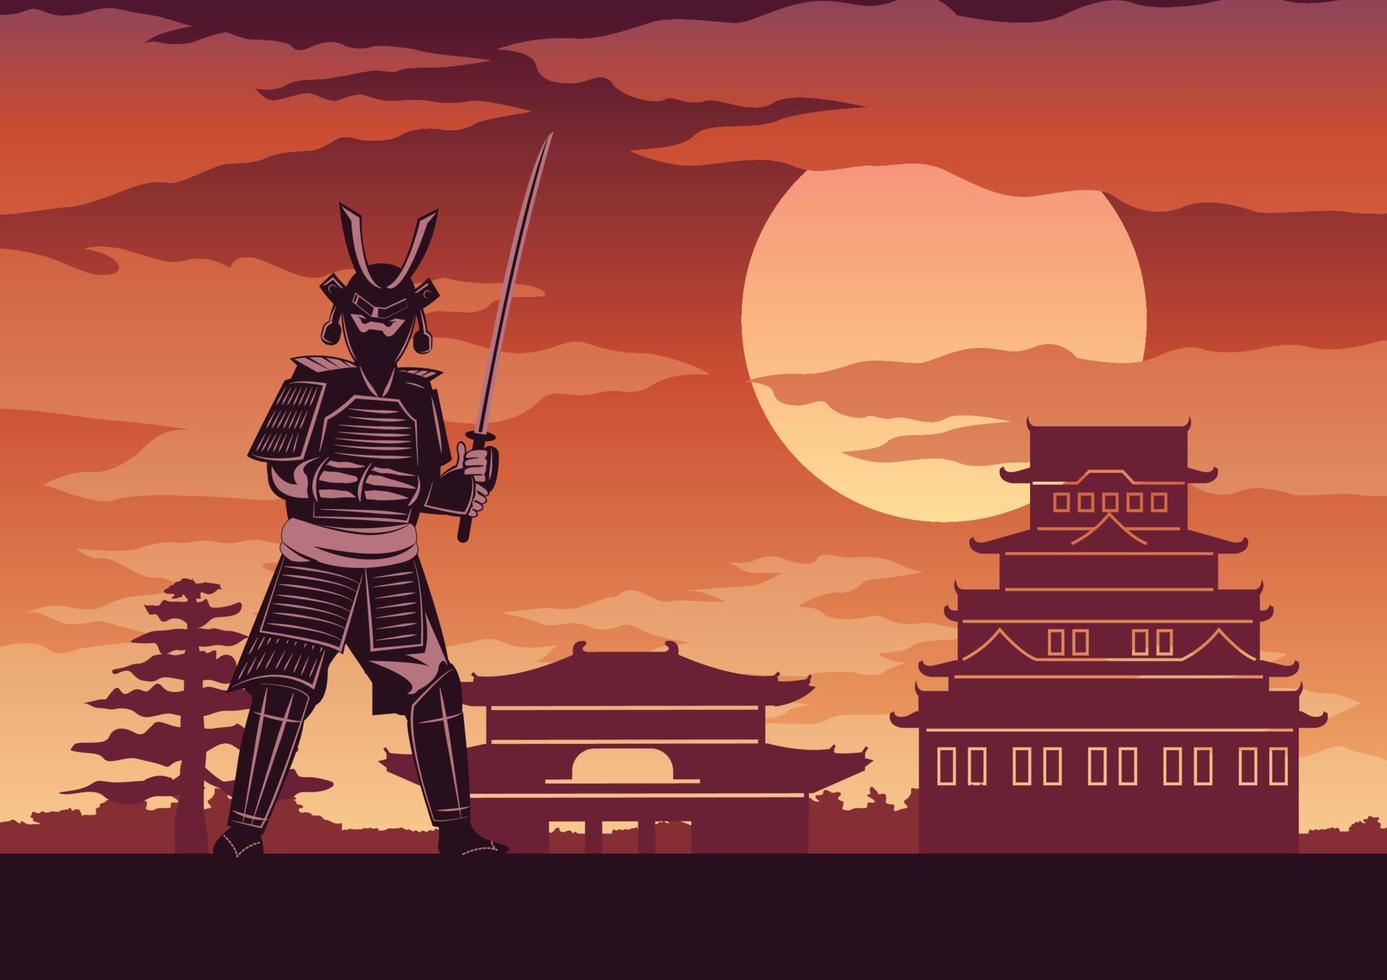 knight of japan called Samurai pose in front of castle with Japanese architecture mean to protect his respect place on sunset time,silhouette design,vector illustration vector